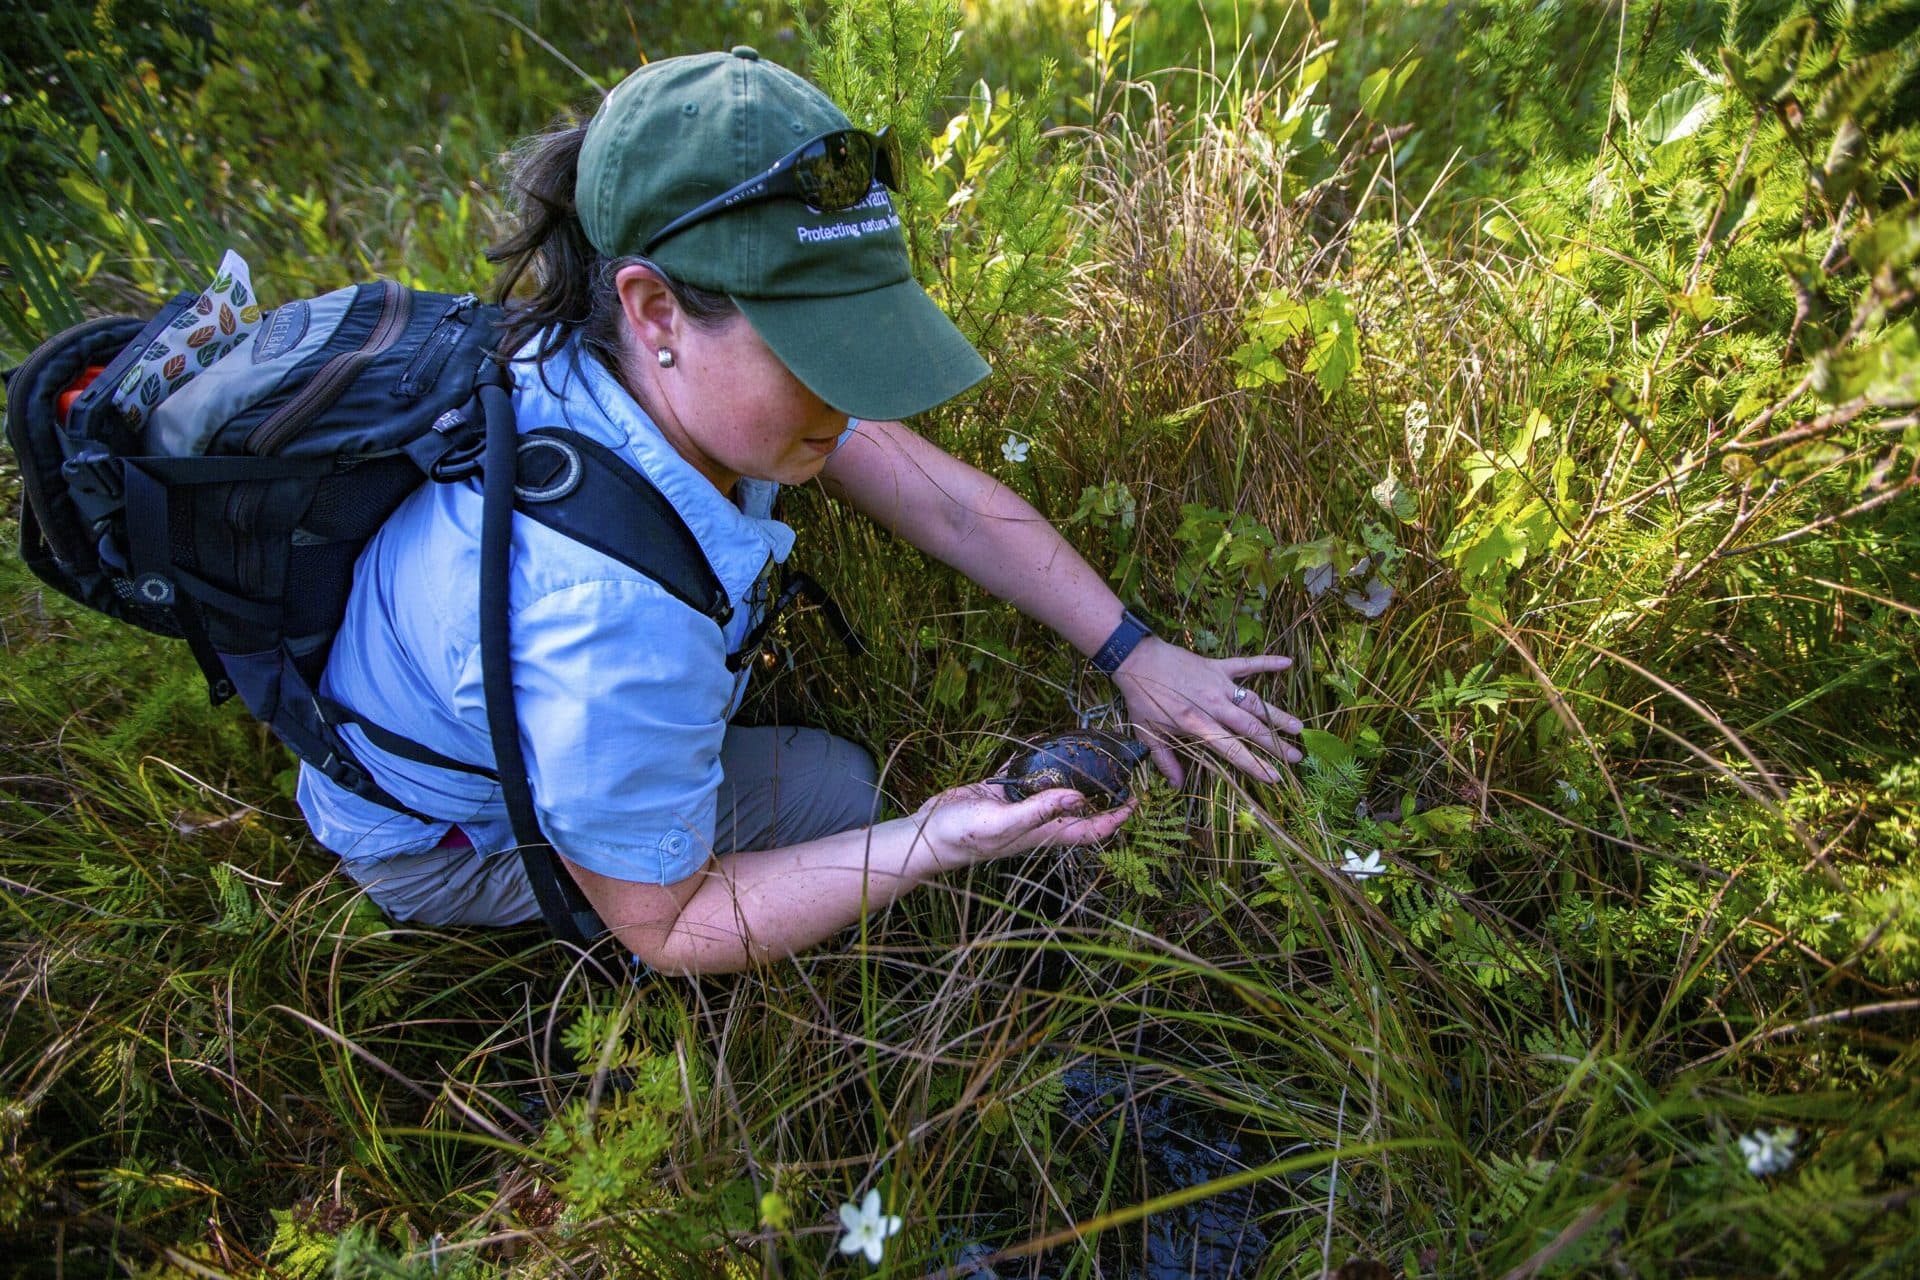 Angela Sirois-Pitel, stewardship manager for The Nature Conservancy, pulls out a male bog turtle from beneath a hummock in a wetland area in the Berkshires.. (Jesse Costa/WBUR)